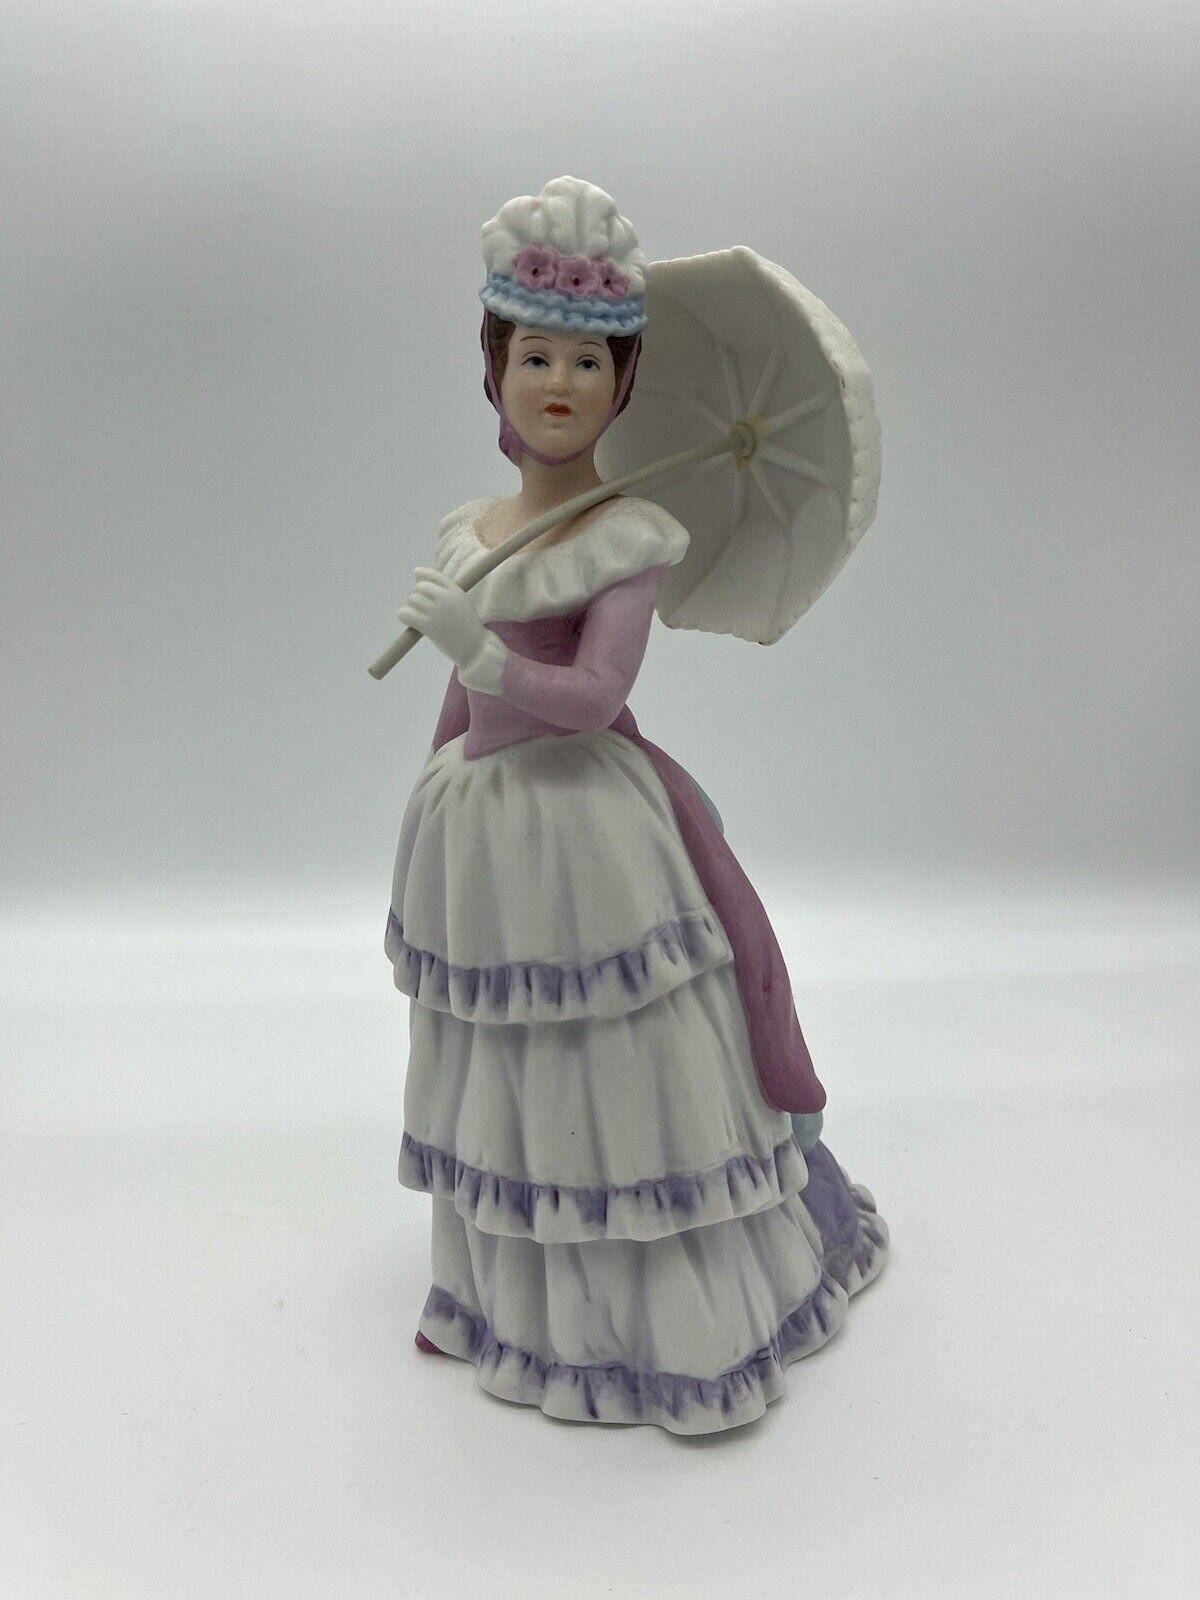 Home Interiors #1431  “Lady With Parasol” Porcelain Figurine 8.5”